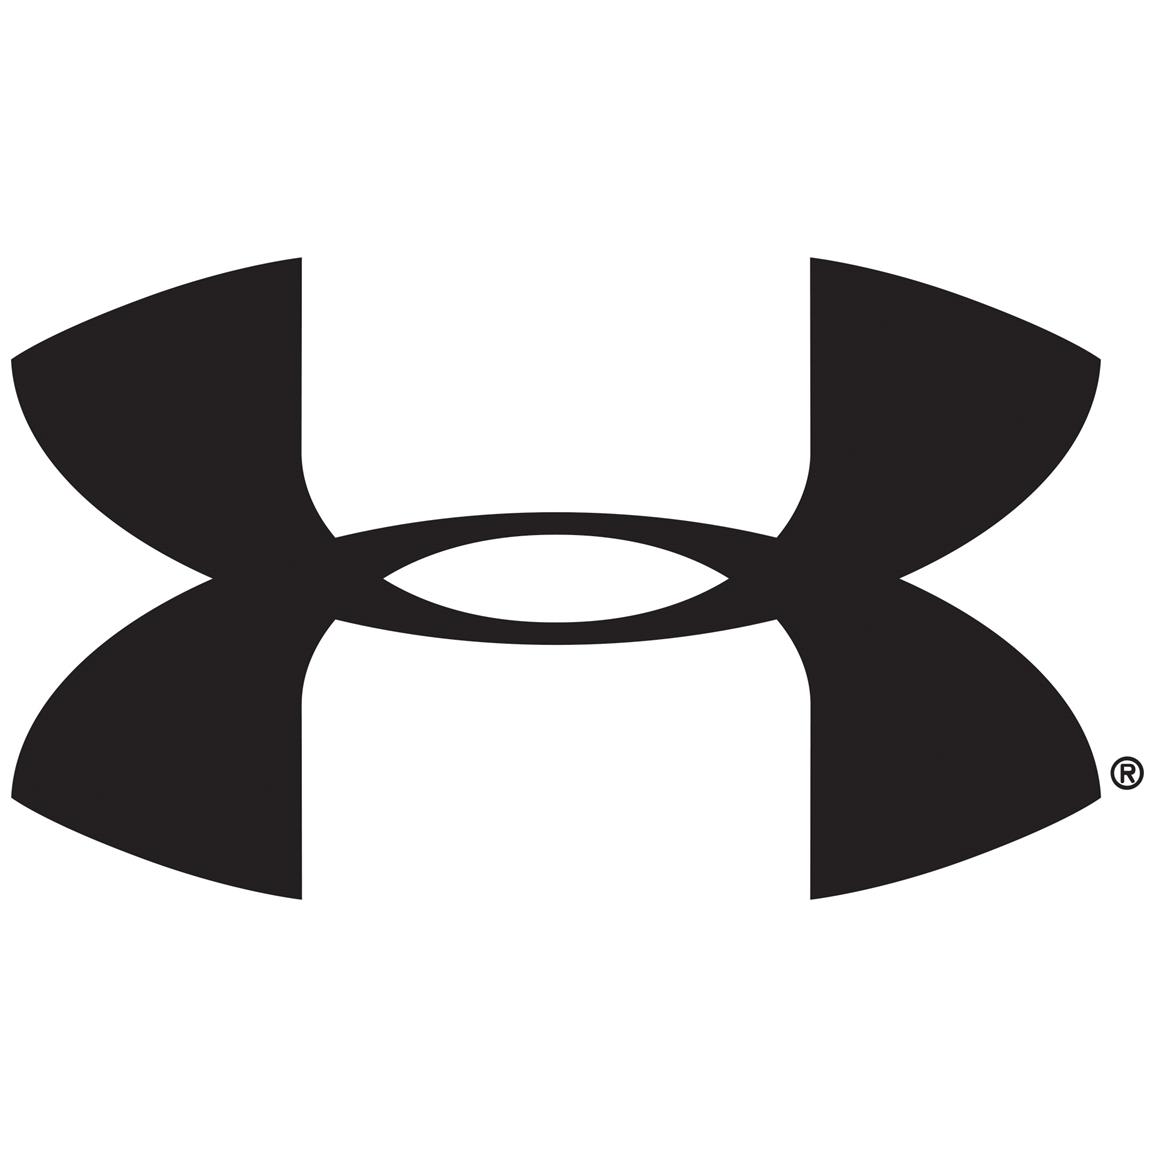 Download 2-Pk. of Under Armour 4" Decal - 620890, at Sportsman's Guide